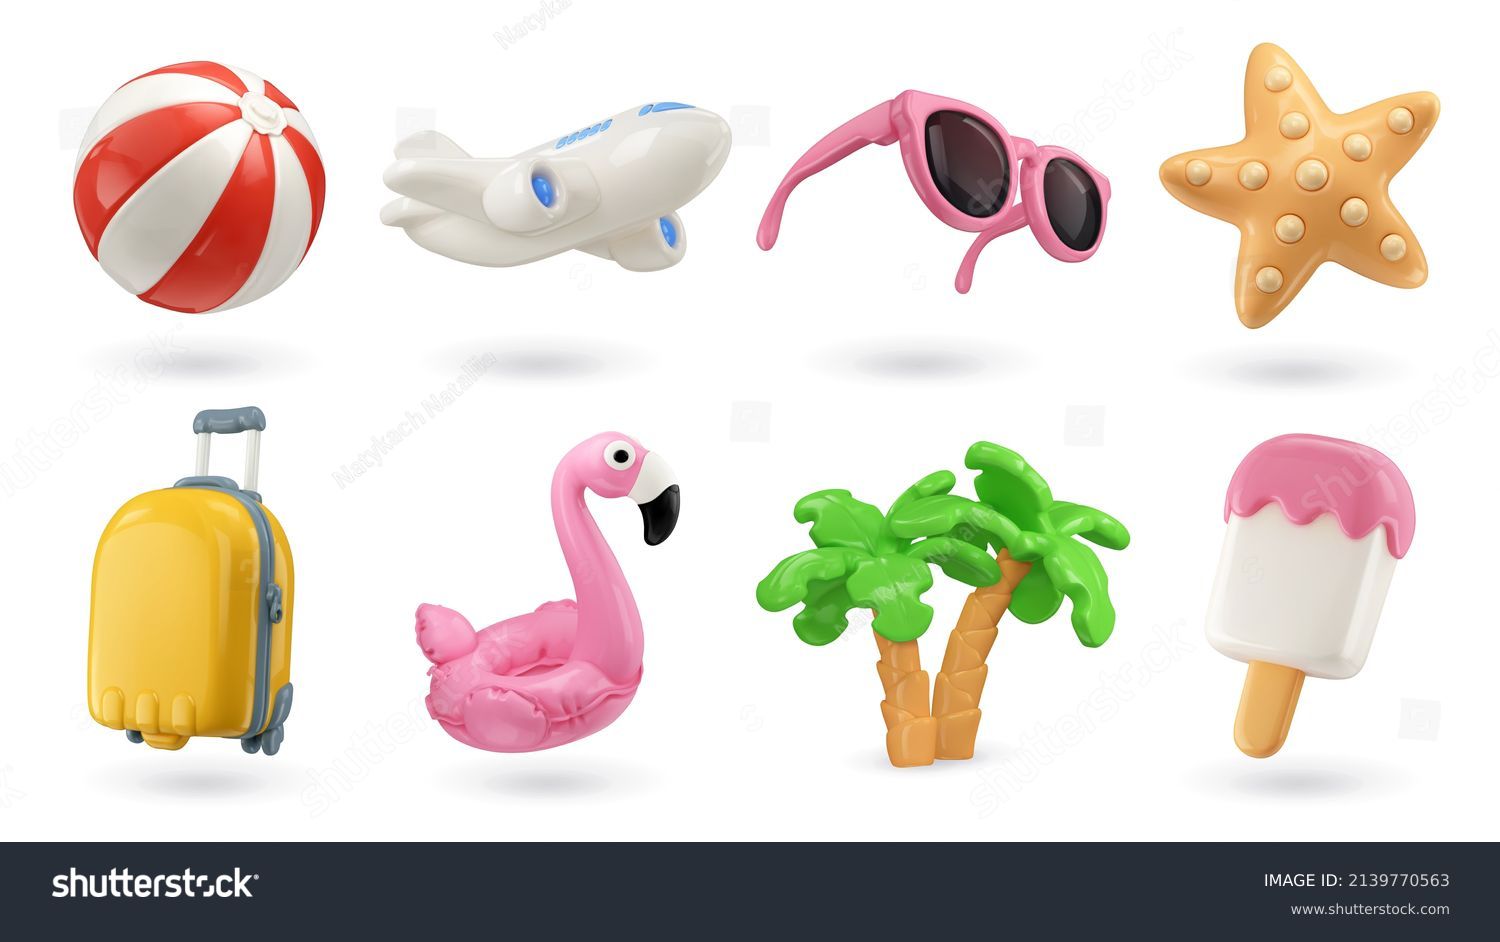 Summer 3d realistic render vector icon set. Inflatable ball, airplane, sunglasses, starfish, suitcase, flamingo, palm trees, ice cream #2139770563